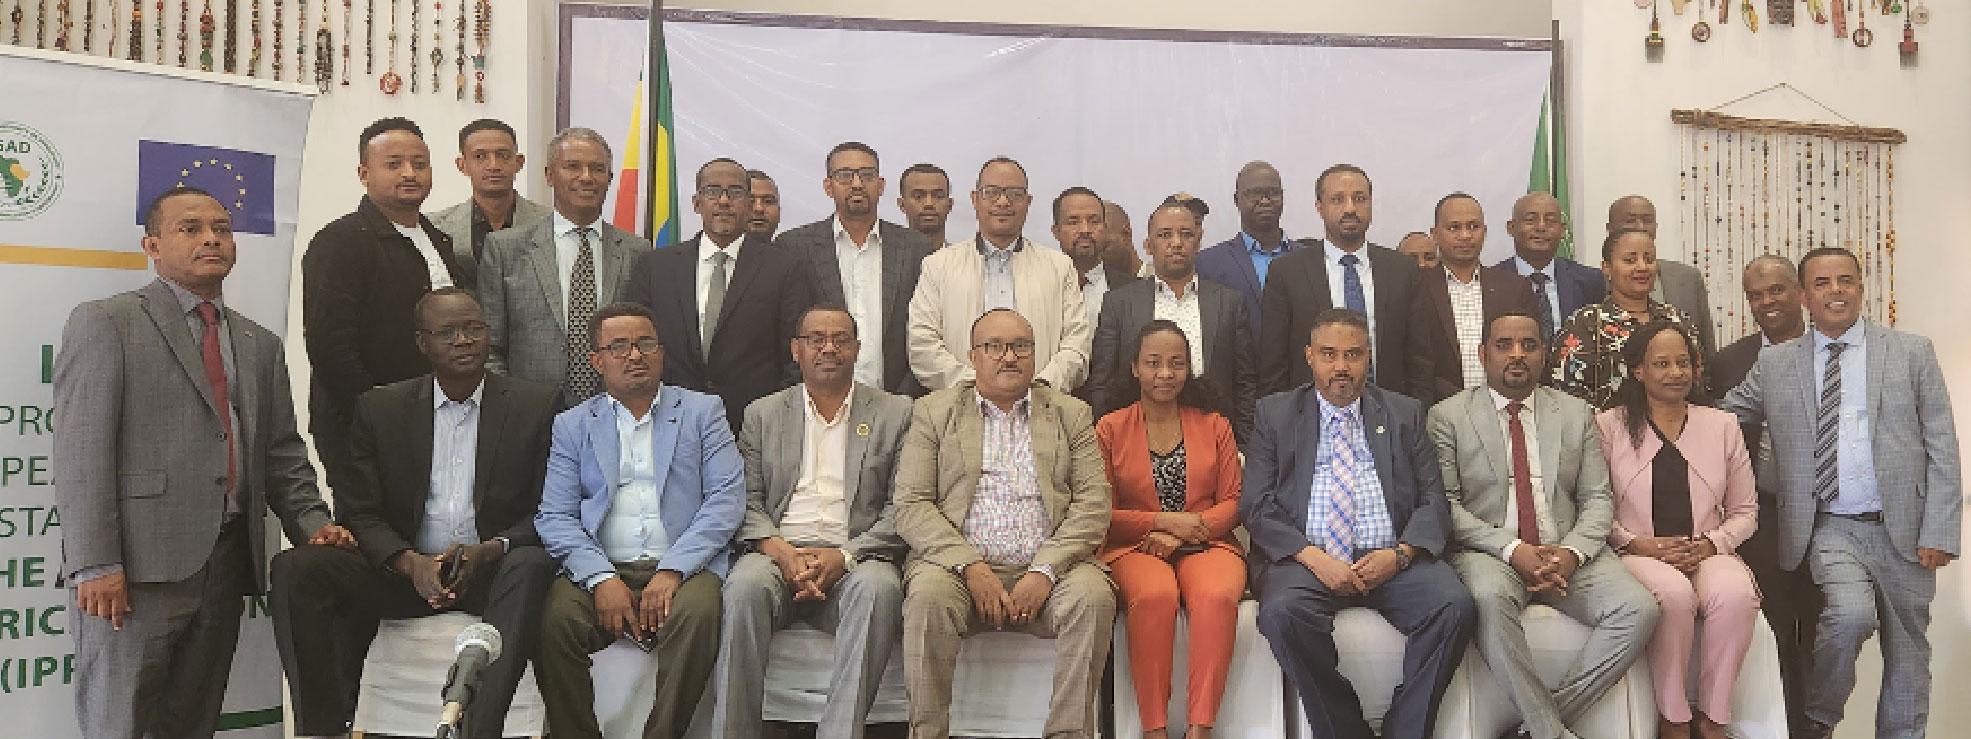 IGAD SSP Holds a Ethiopia National Workshop for Federal and Regional Security Sector Officials to Promote Interagency Cooperation and Coordination in Addressing the Transnational Security Threats.